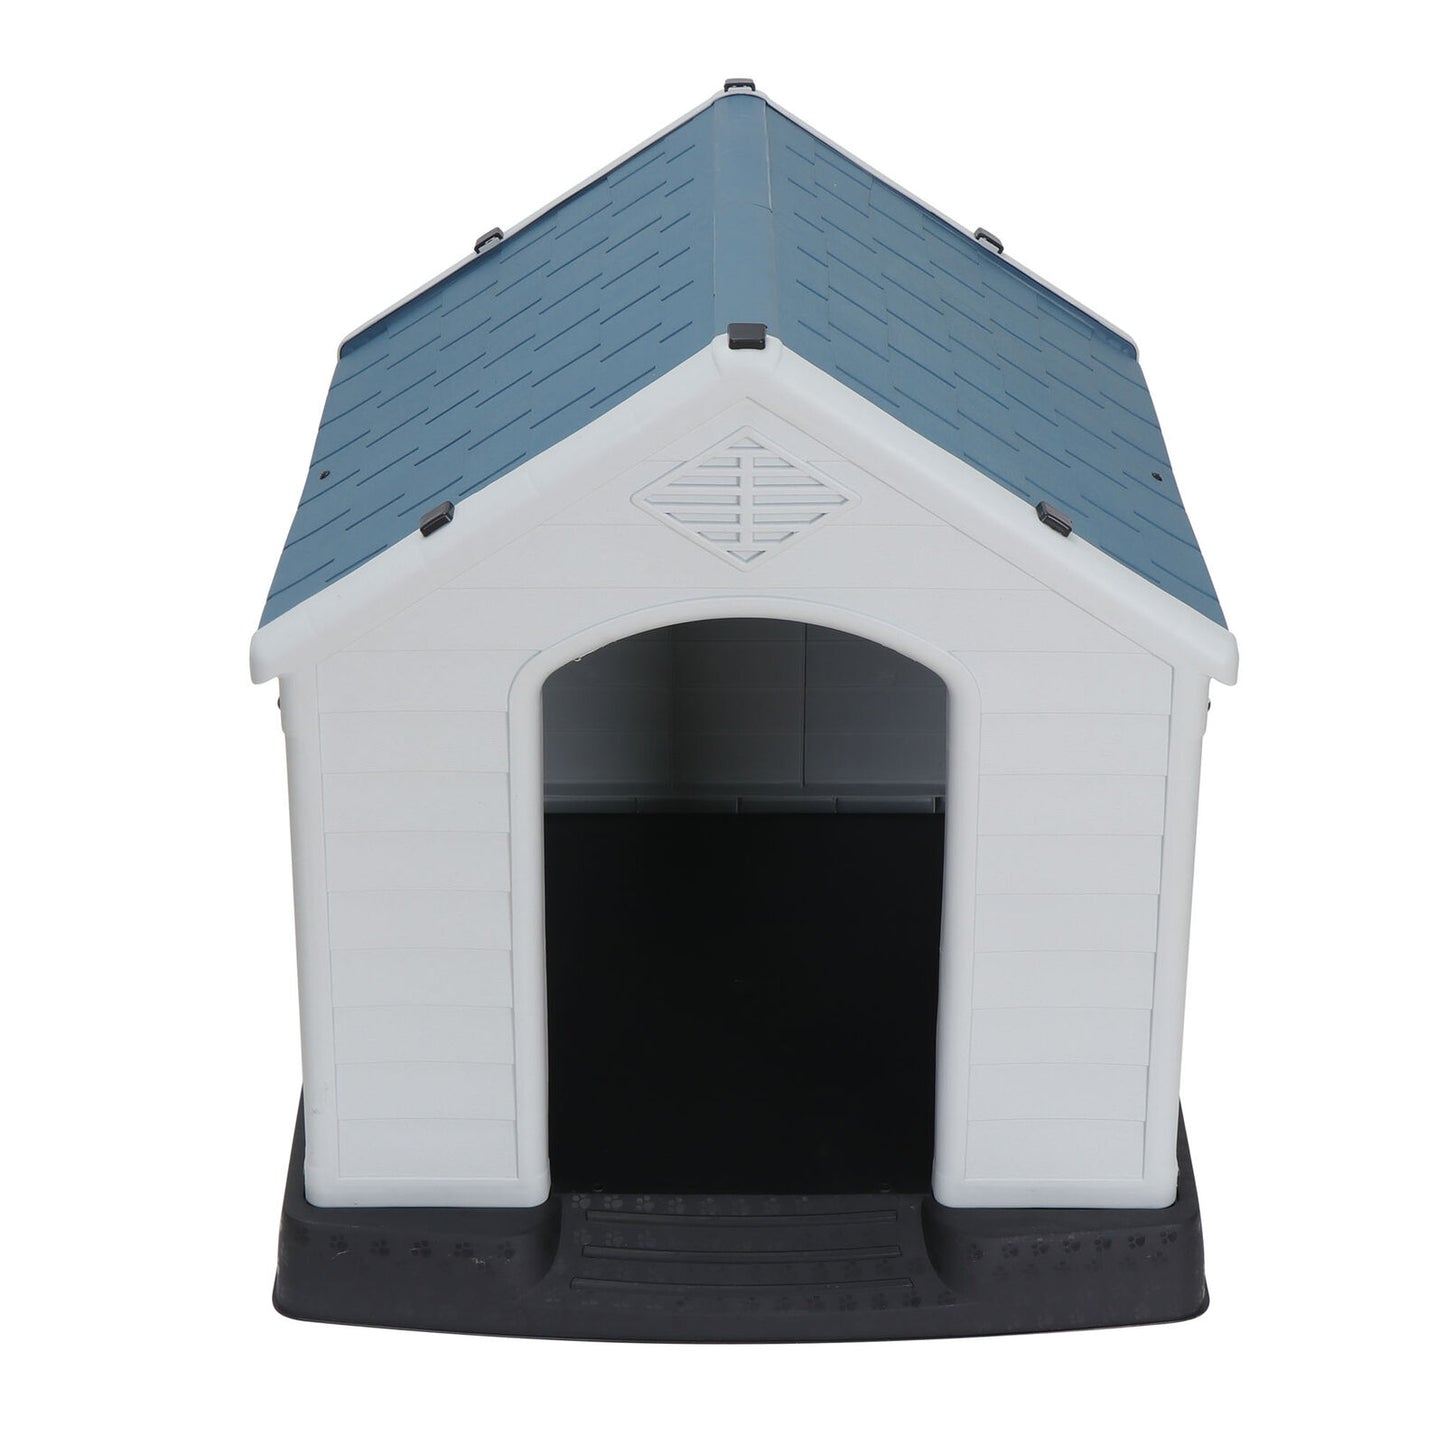 2X Design Dog House Shelter Easy to Assemble Perfect for Backyards All-Weather